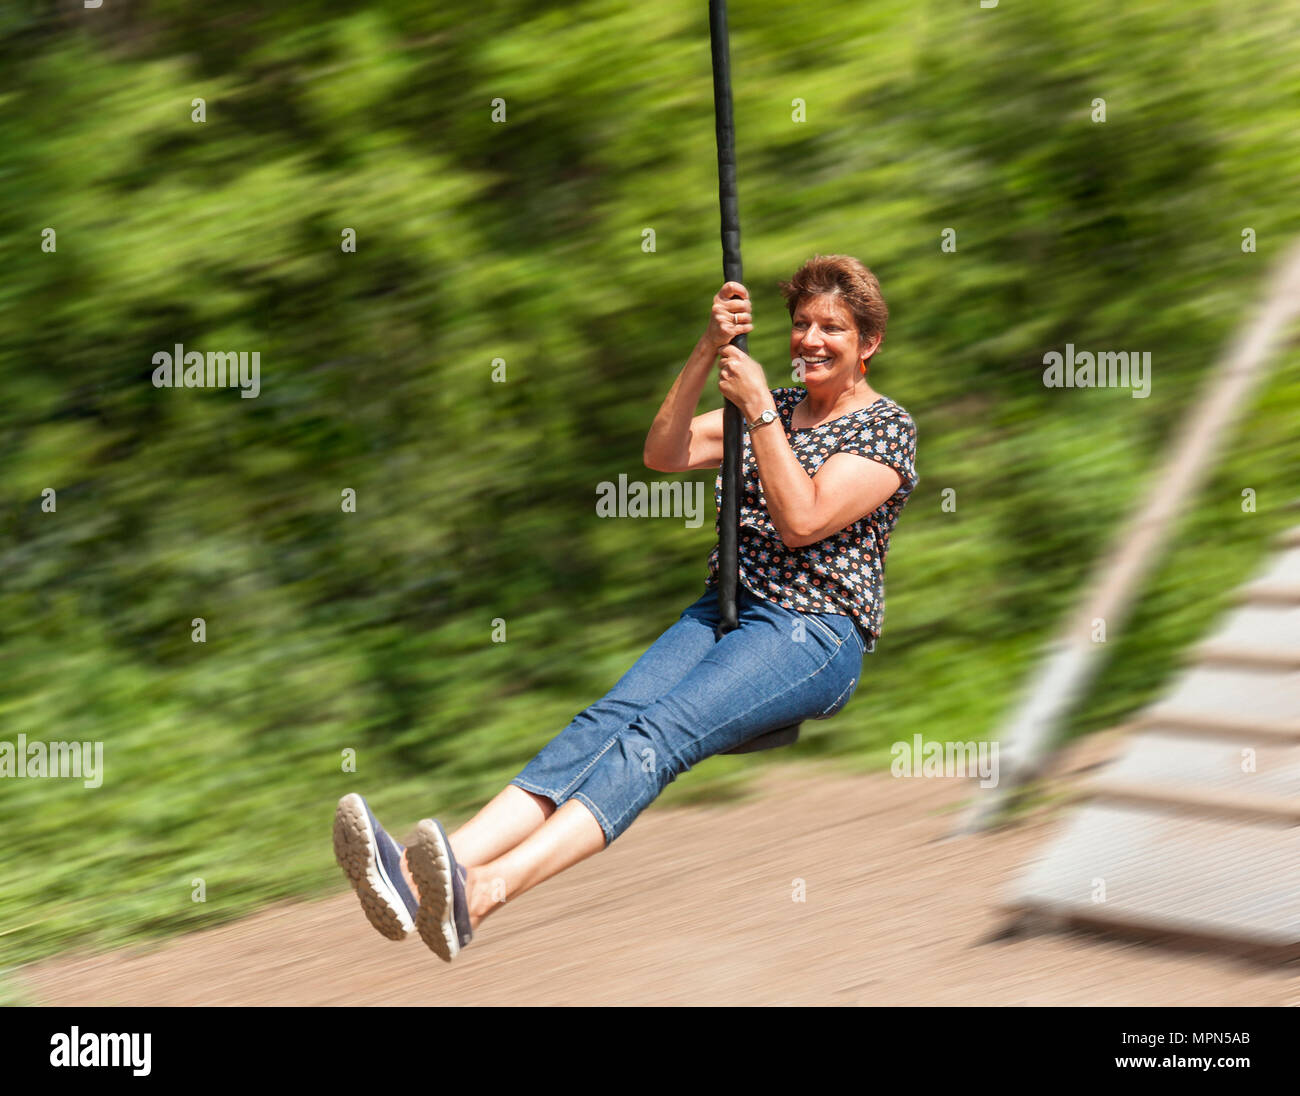 Middle age woman on a zip wire. Stock Photo